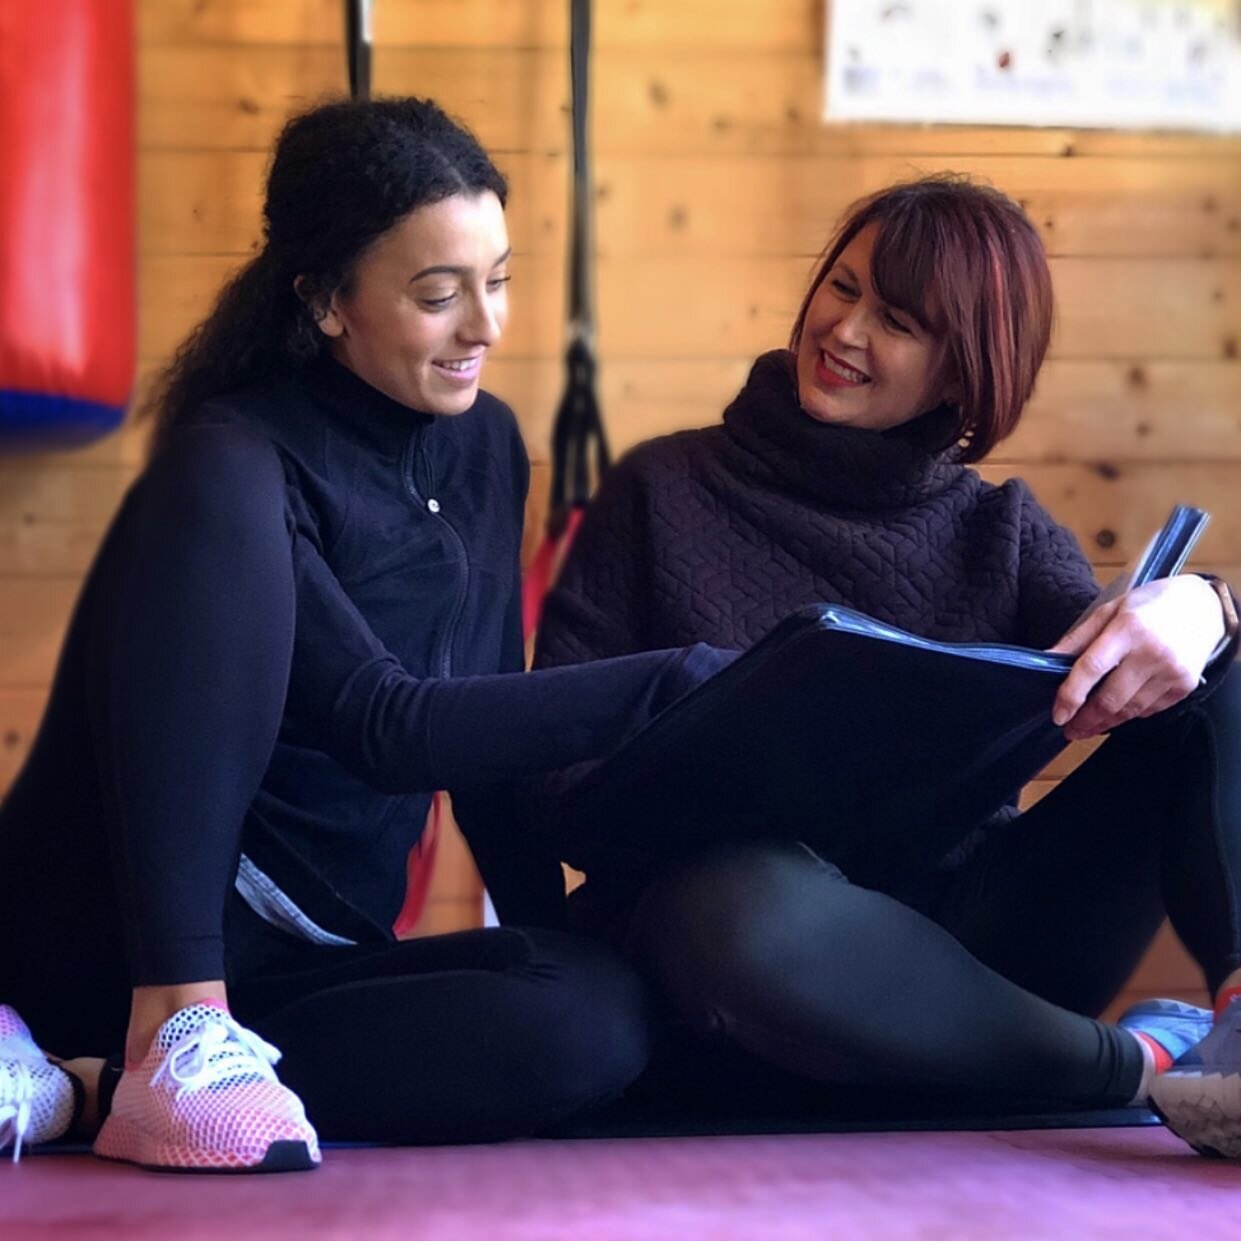 Book your FREE 30 minute consultation with me today so we can begin to discuss your fitness journey together - https://www.liveforfitness.co.uk/book-free-consultation

#fitness #femalepersonaltrainer #personaltrainer #personaltraining #privategym #gu